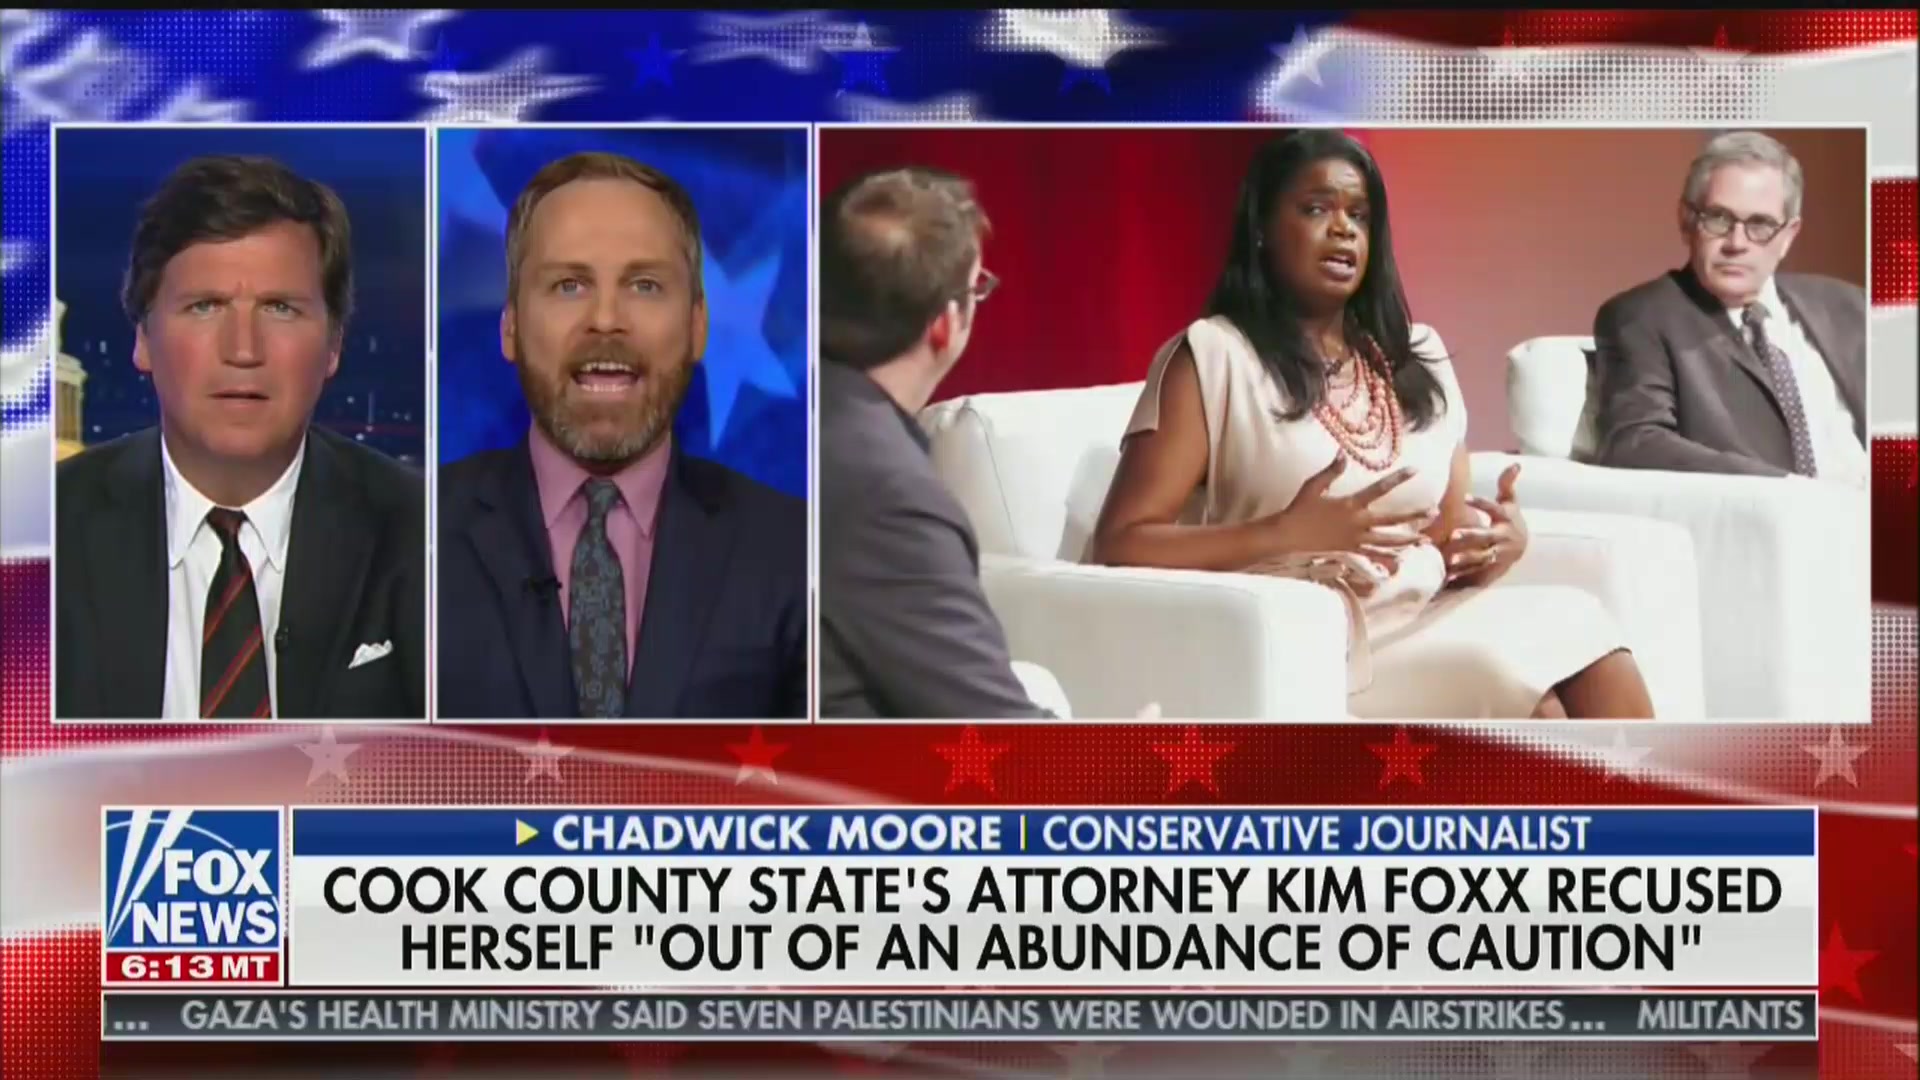 Tucker Carlson Guest Ties Jussie Smollett Decision to Soros, Black Panthers, Kamala Harris and Obama